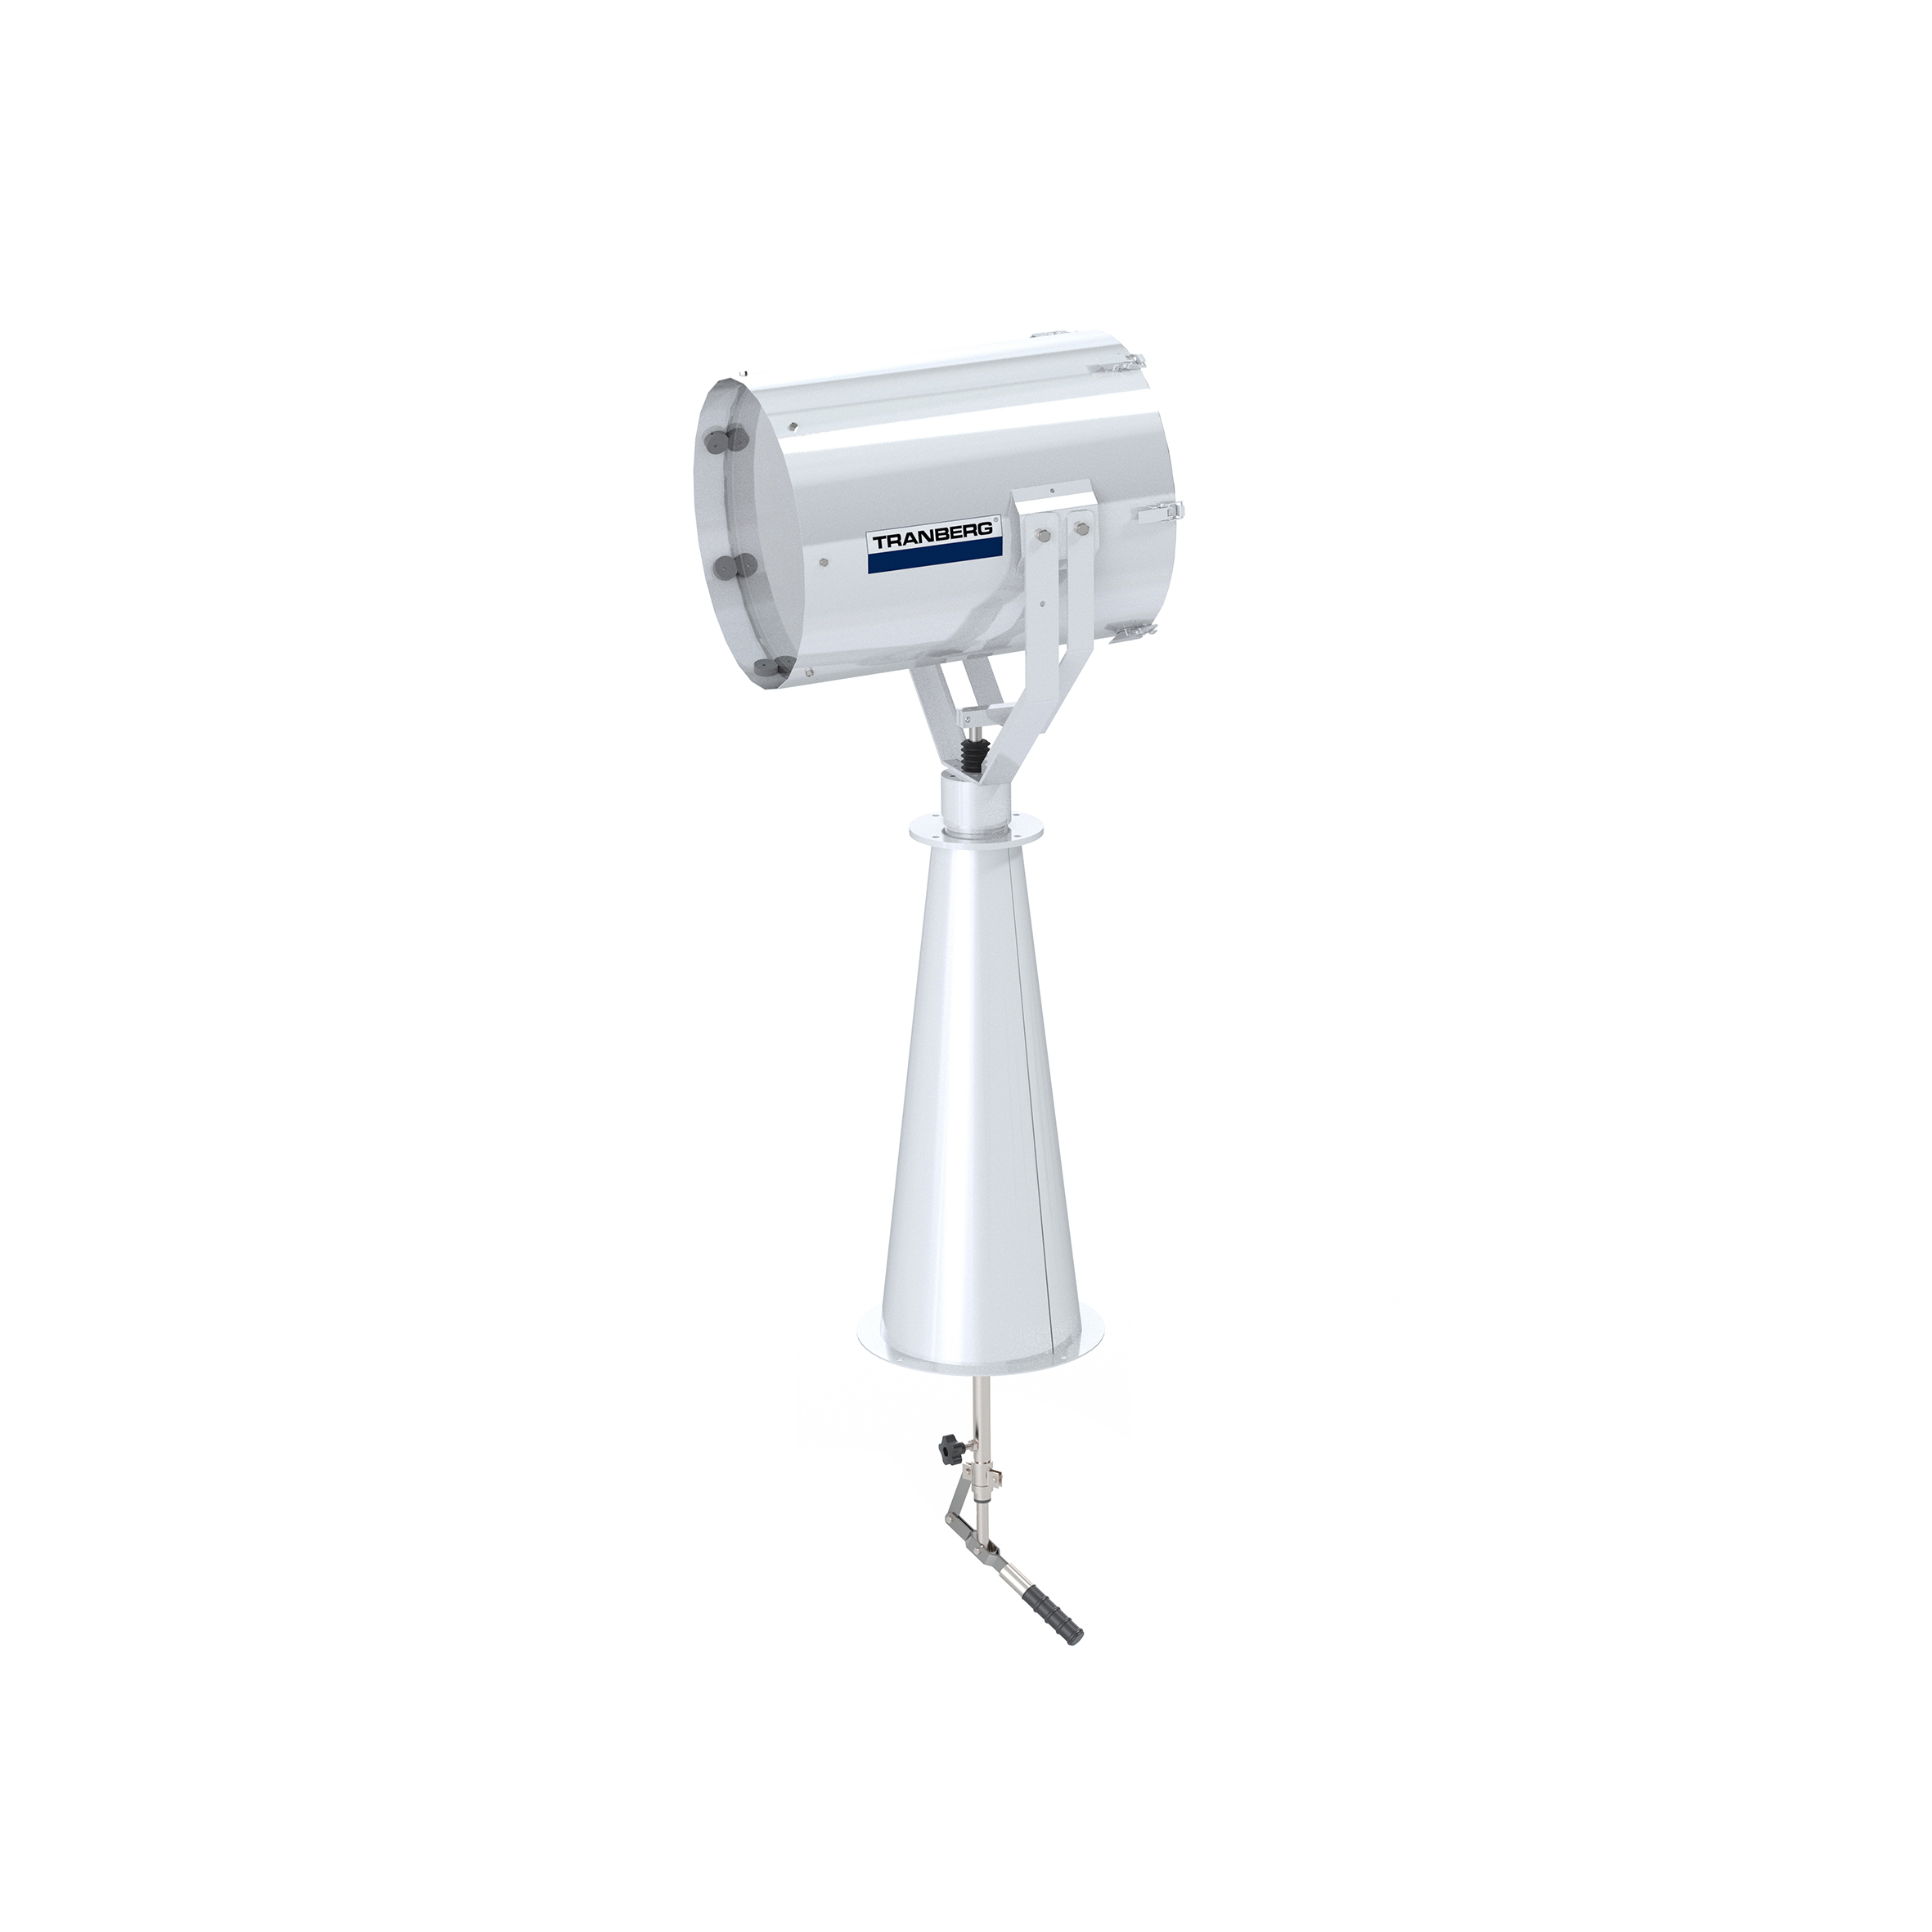 TEF 2630 Searchlight: Halogen 1000W bulb incl, 110V, Bridge Controlled, Stainless Steel, W/300 mm pe photo